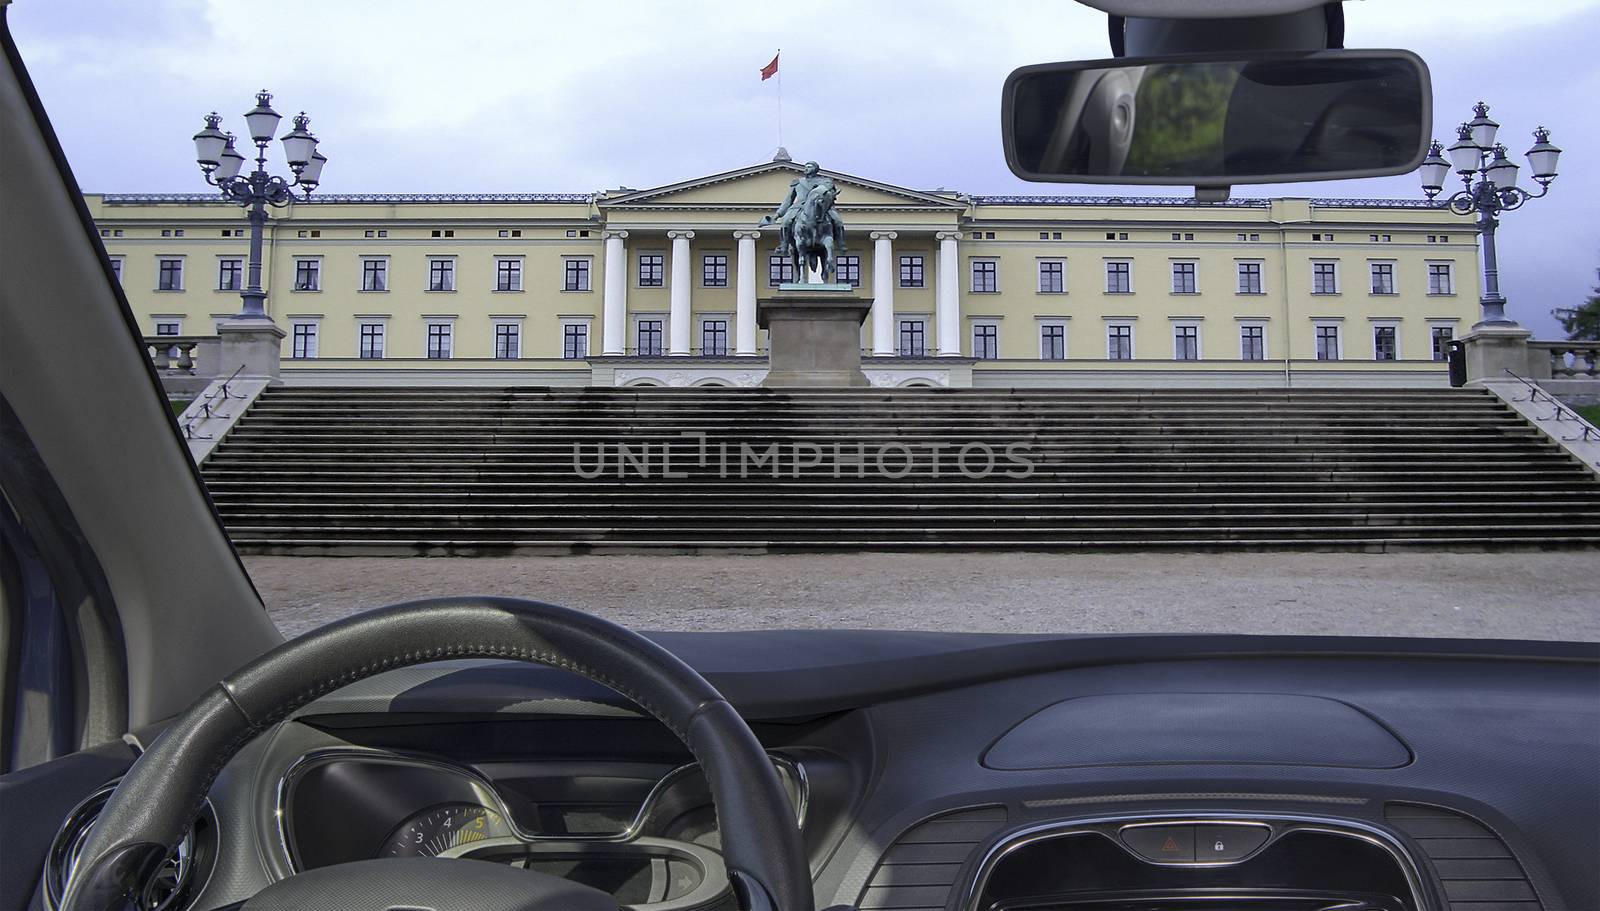 Car windshield with view of Royal Palace in Oslo, Norway by marcorubino